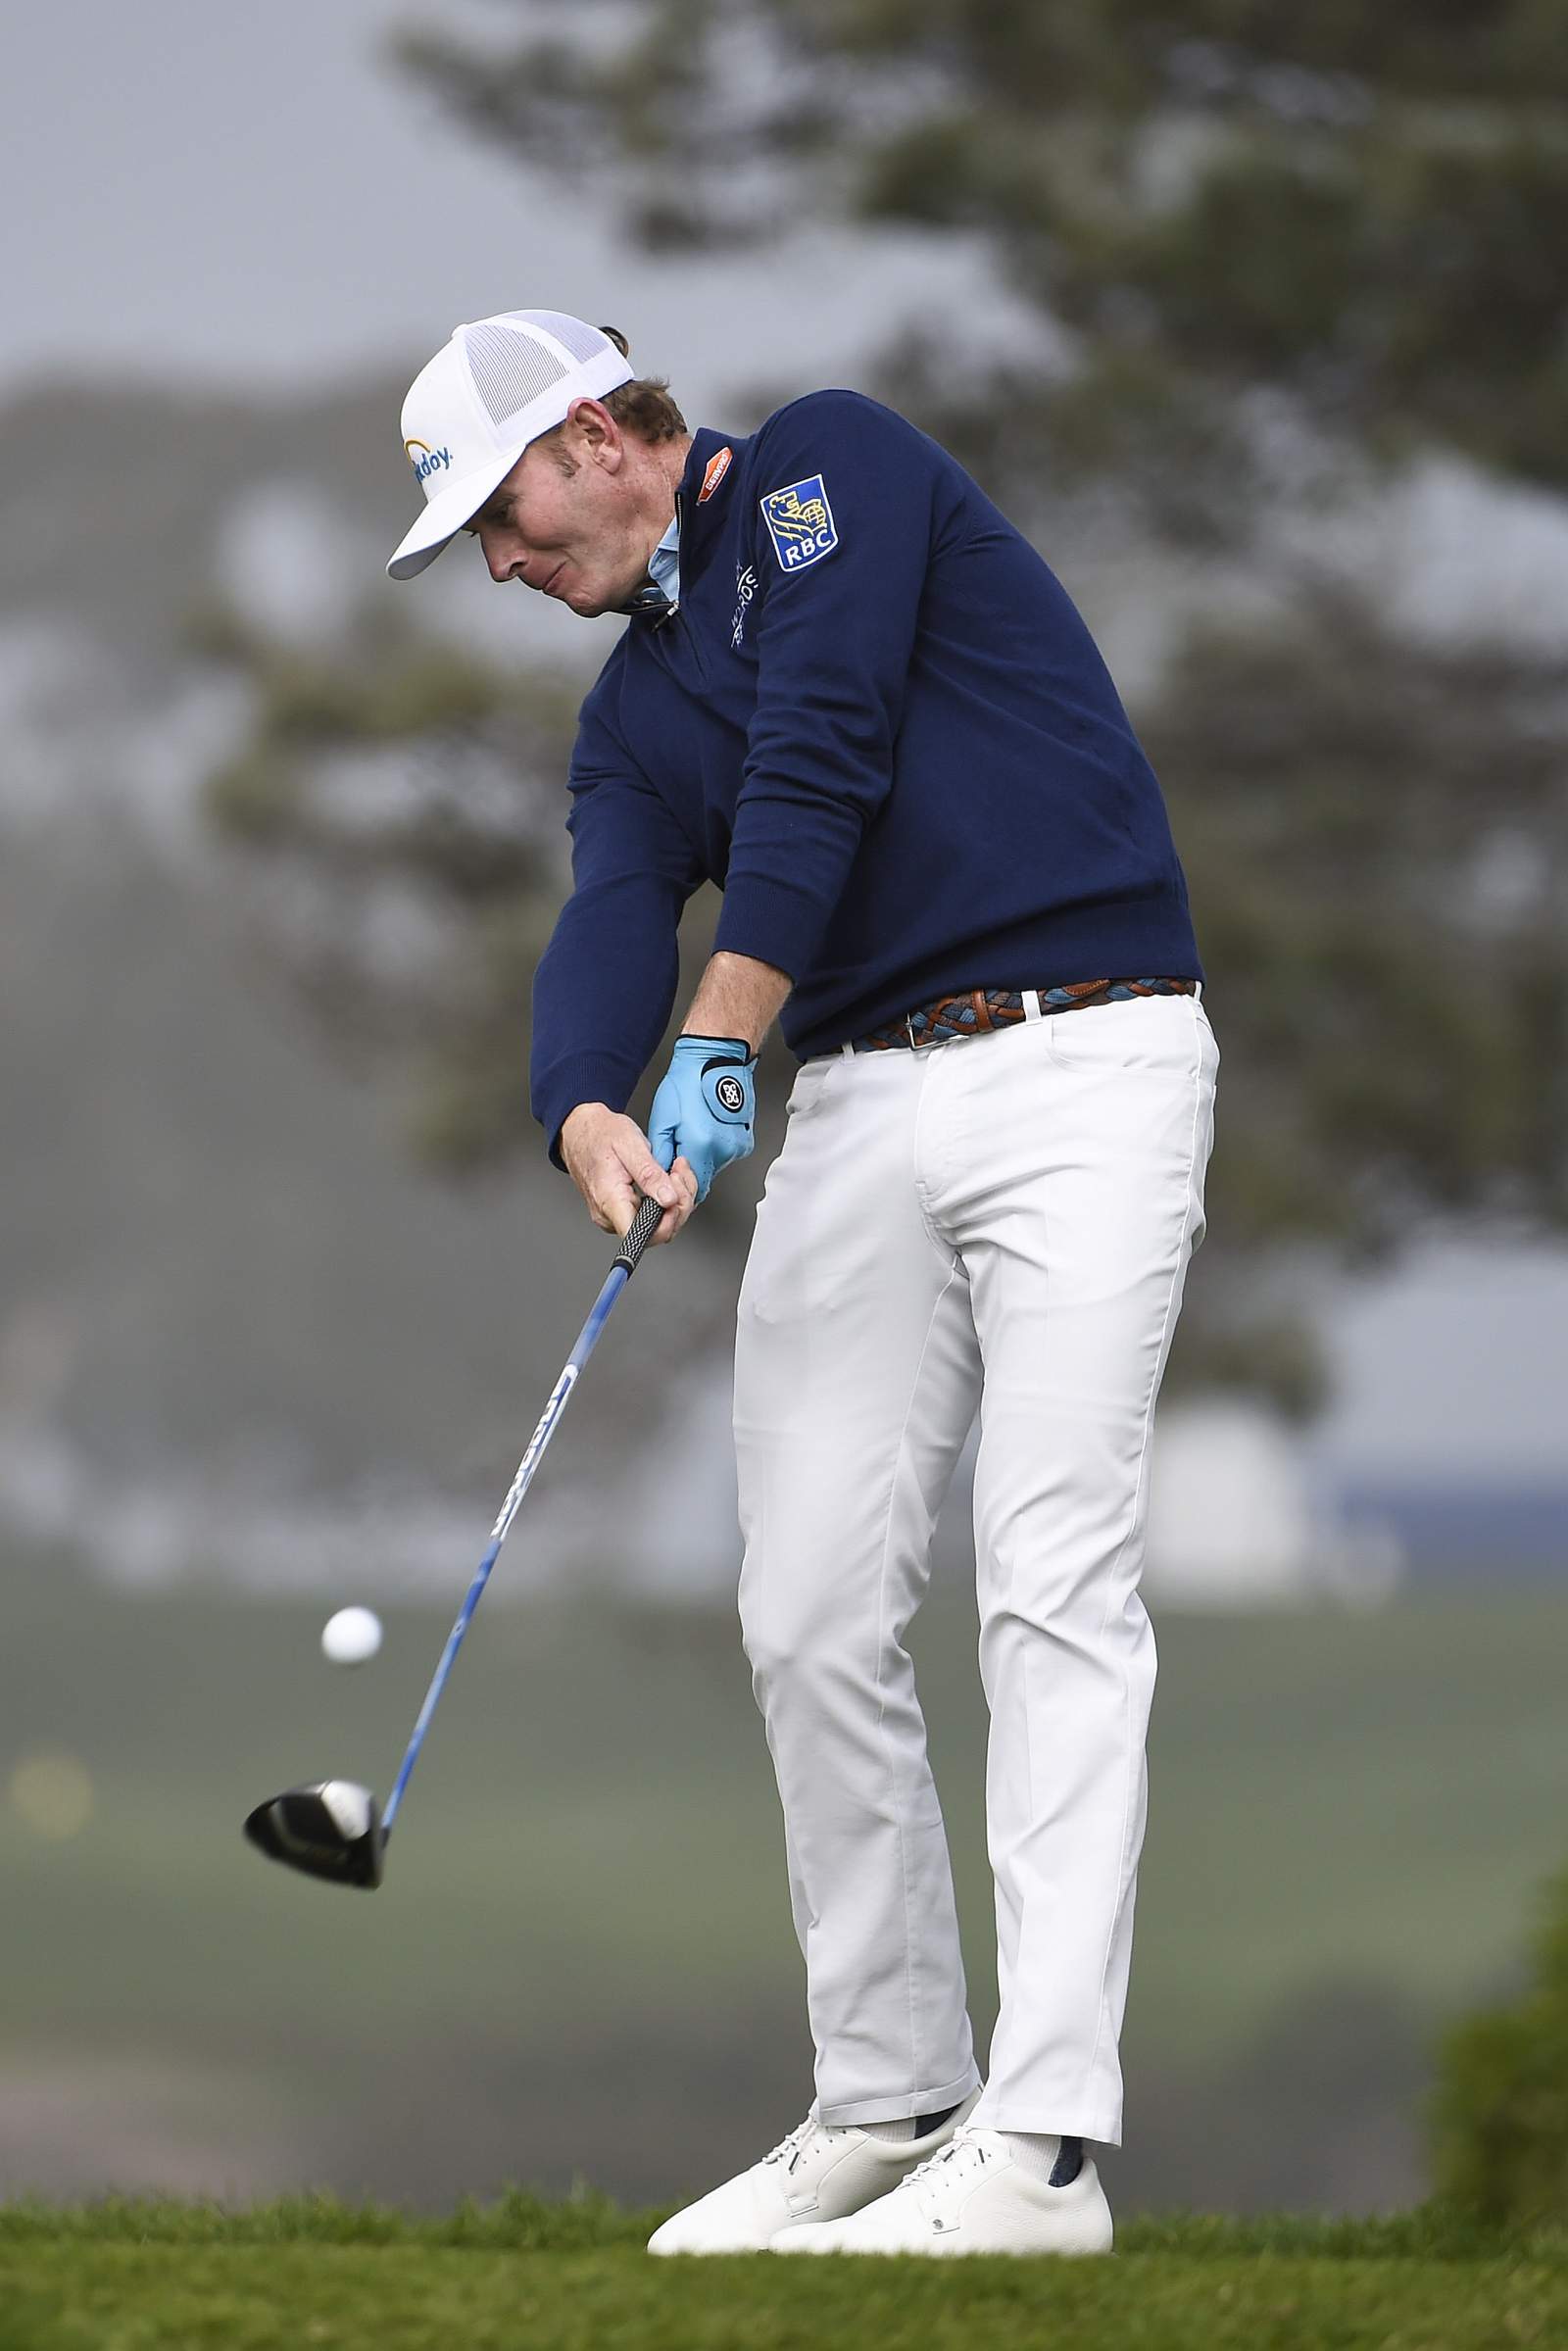 Rahm takes the lead at Torrey Pines with McIlroy lurking